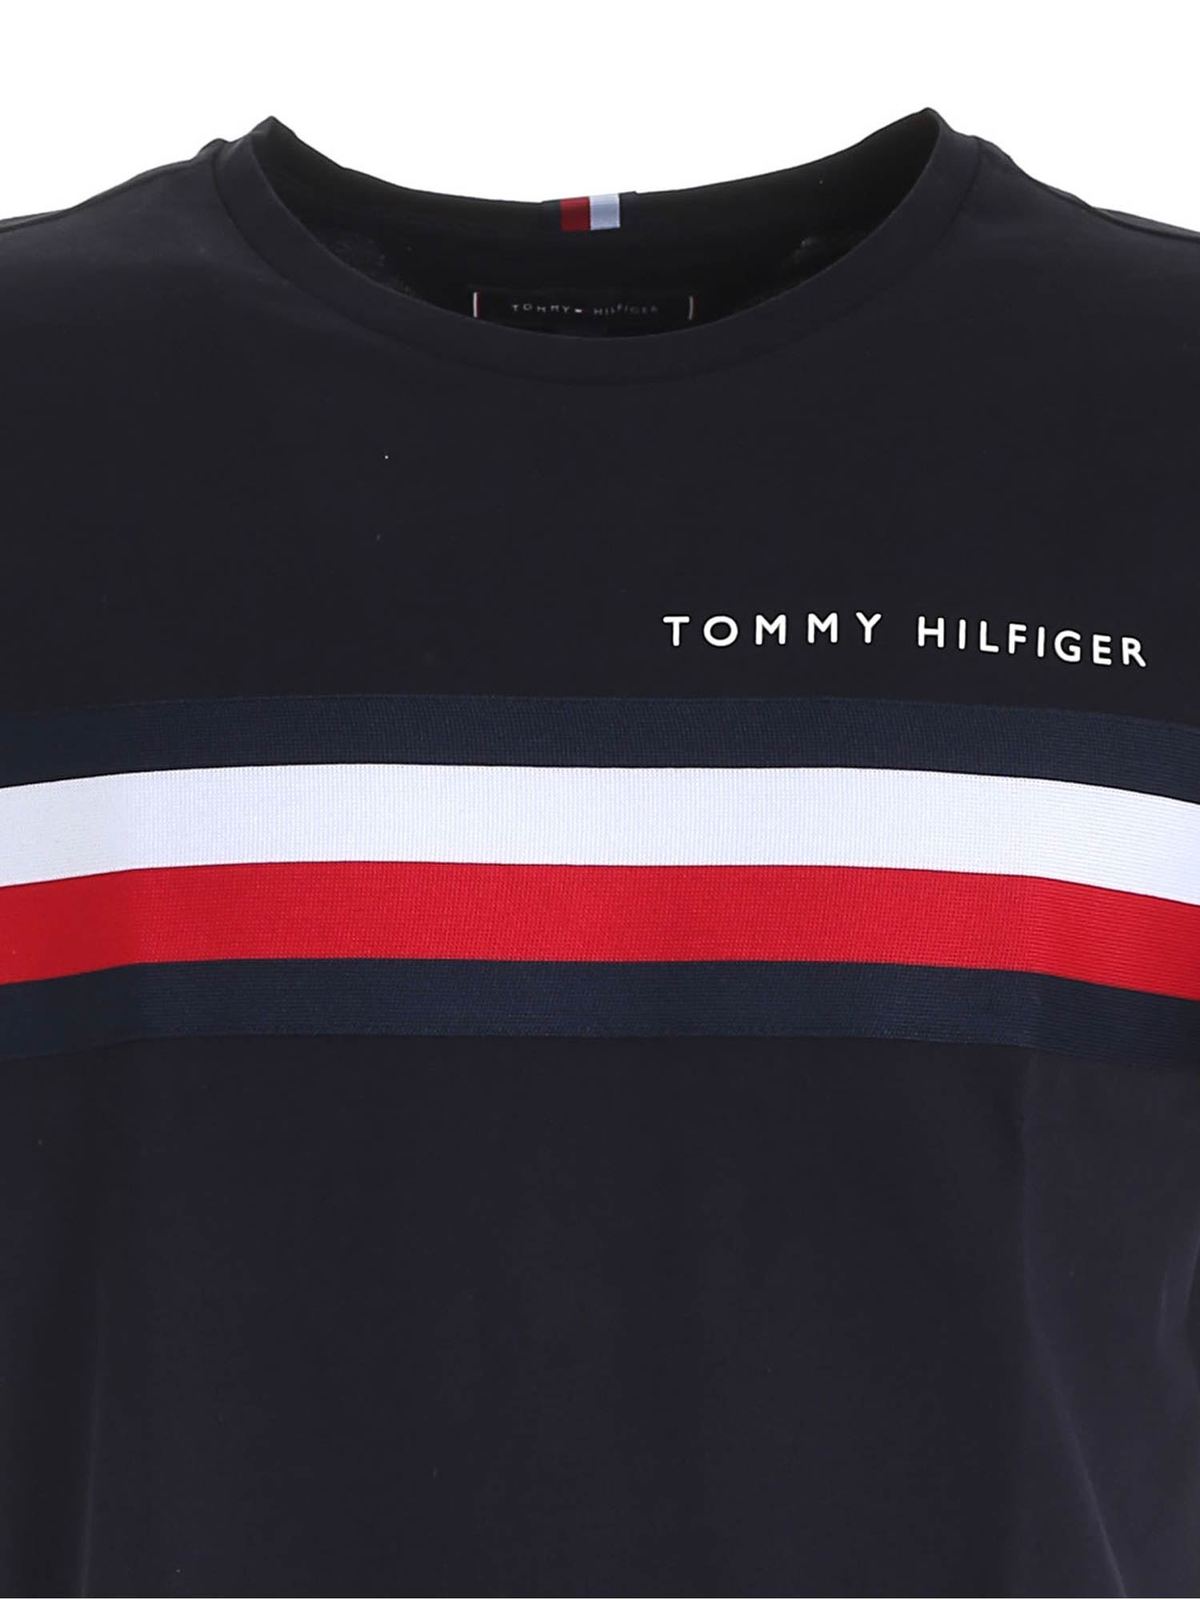 Tommy Hilfiger Global Factory Sale, UP TO 60% OFF | www 